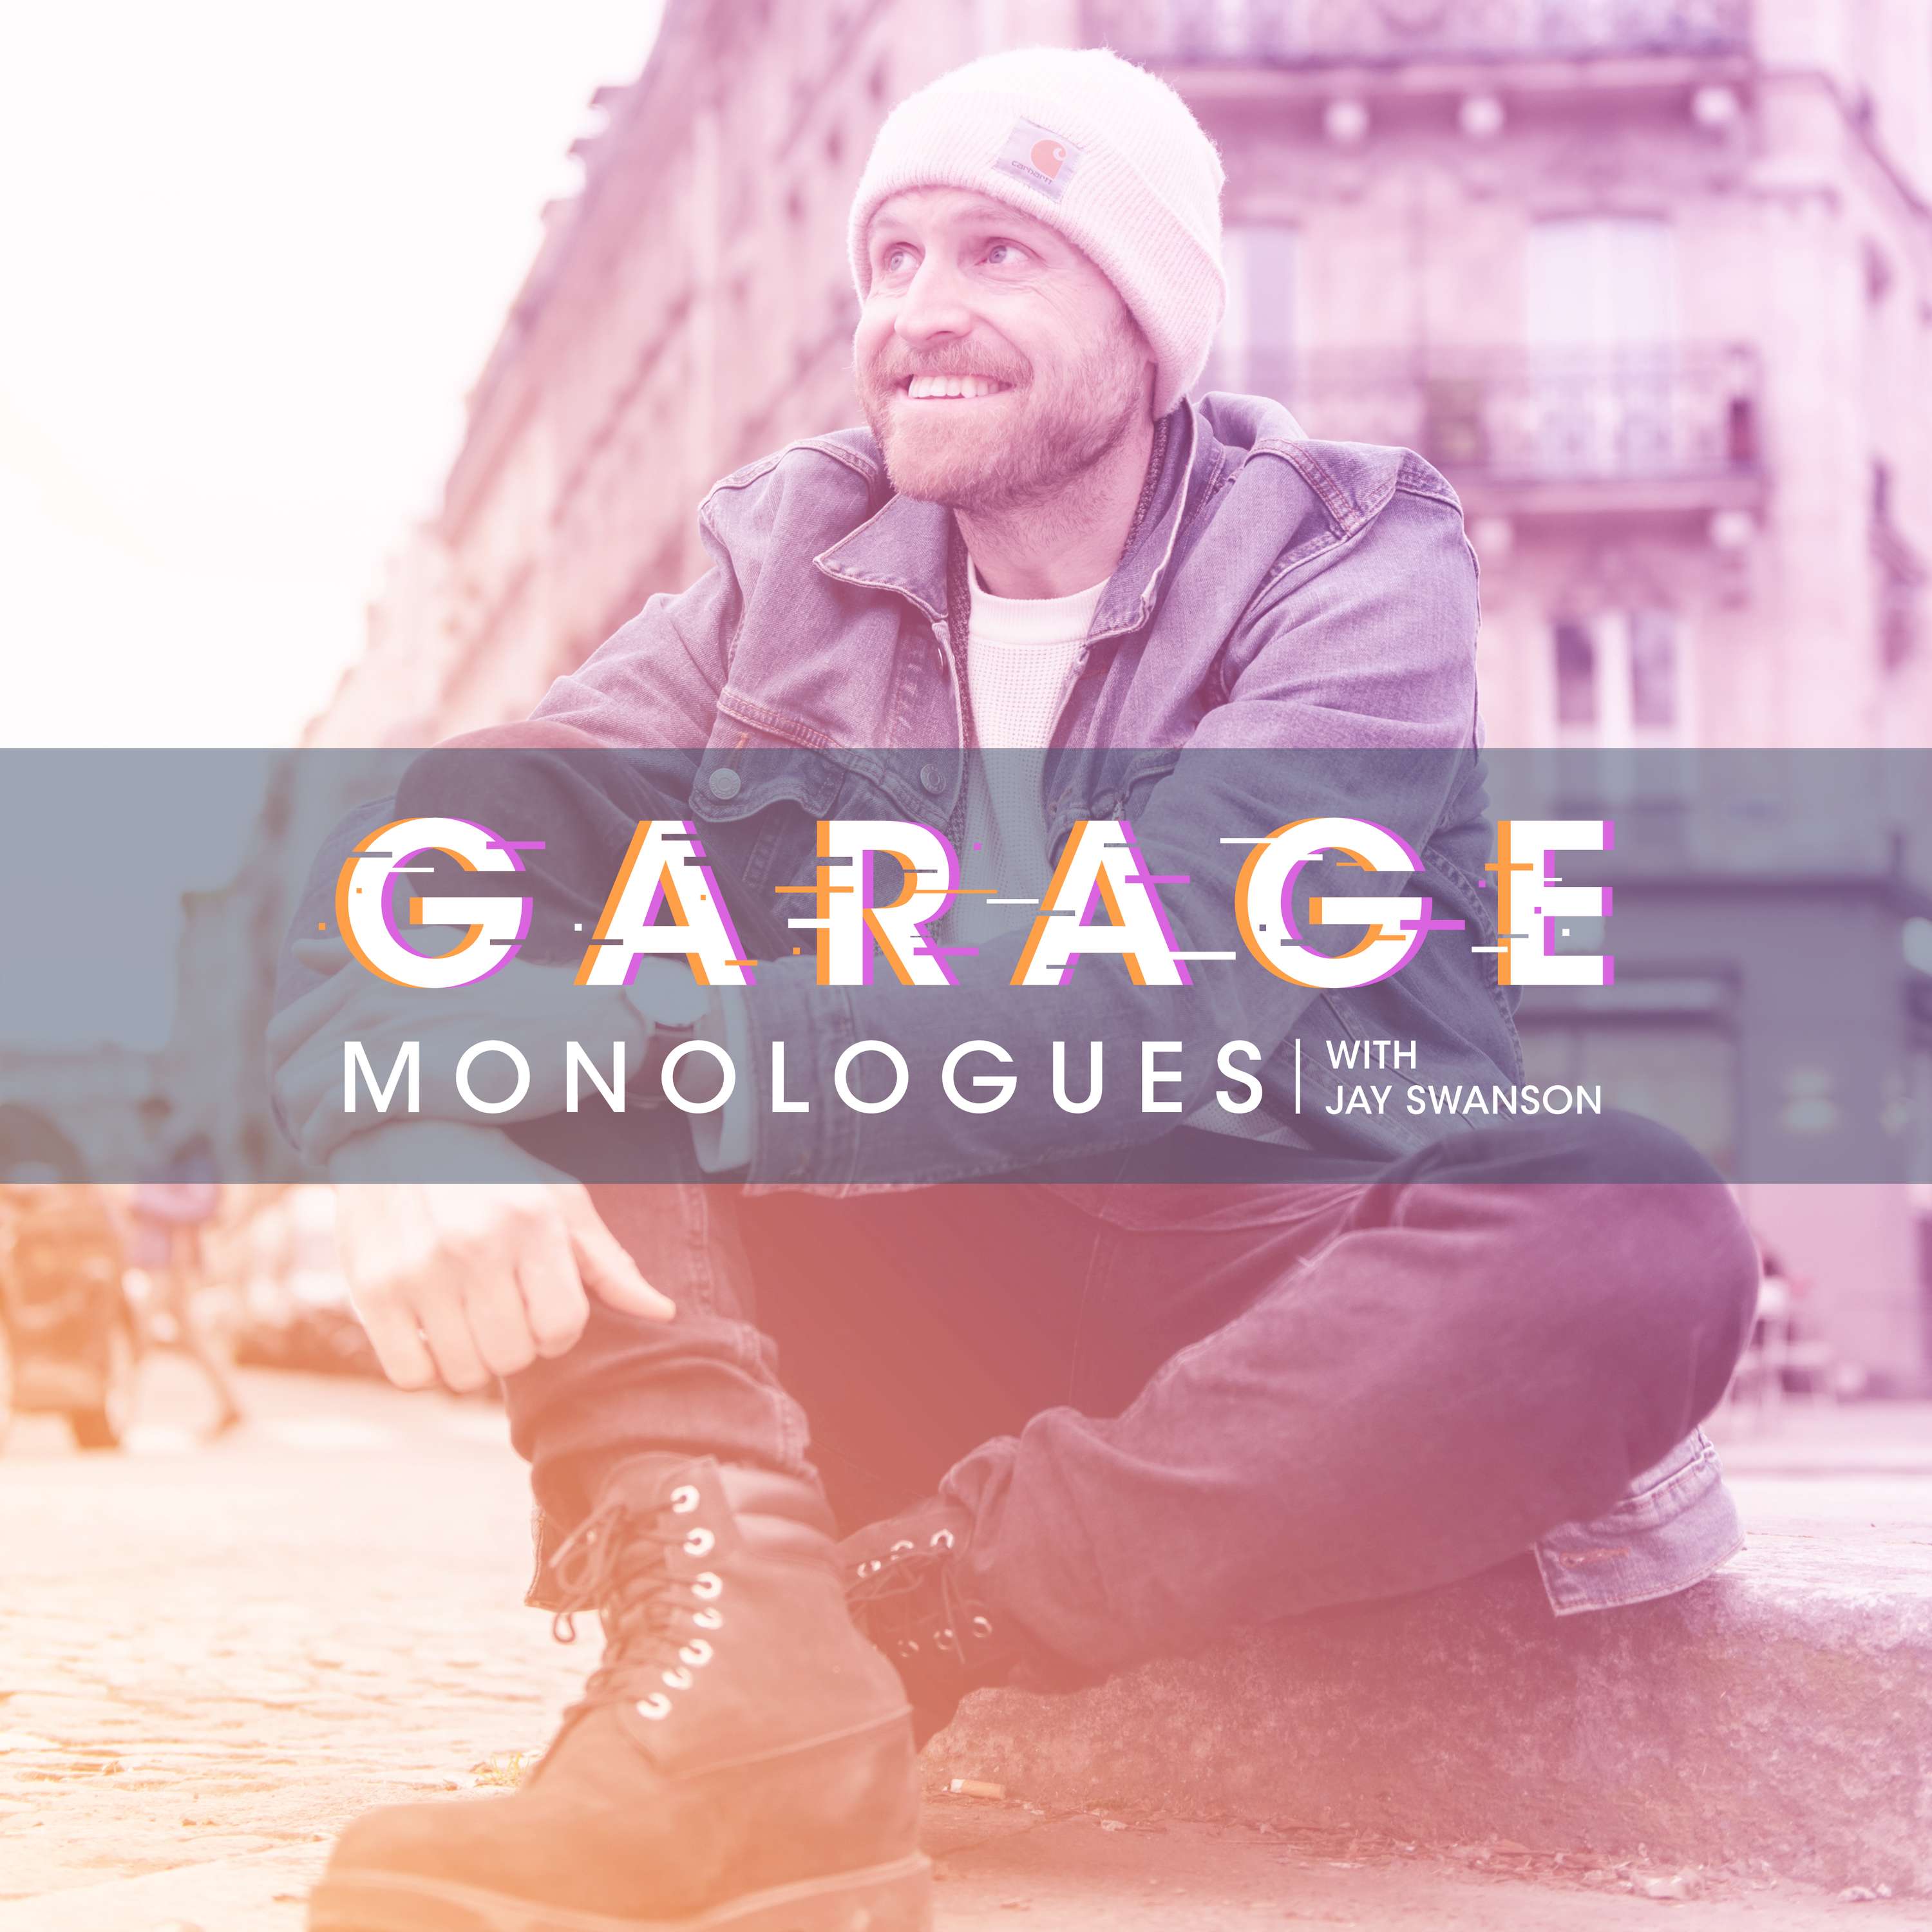 Garage Monologues with Jay Swanson